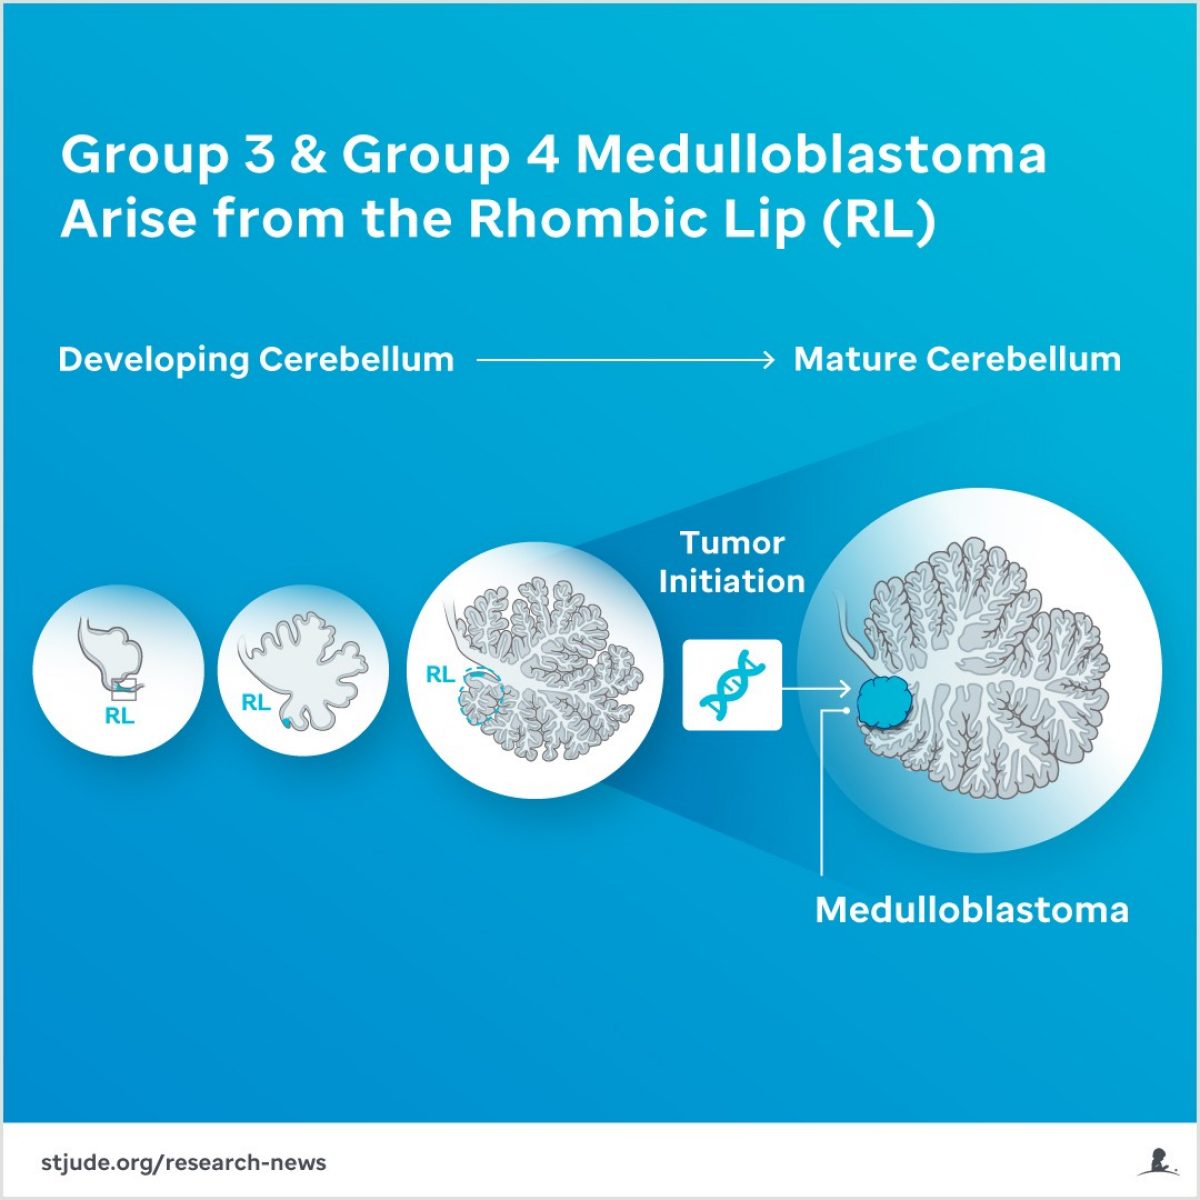 Group 3 and group 4 medulloblastoma arise from the rhombic lip.